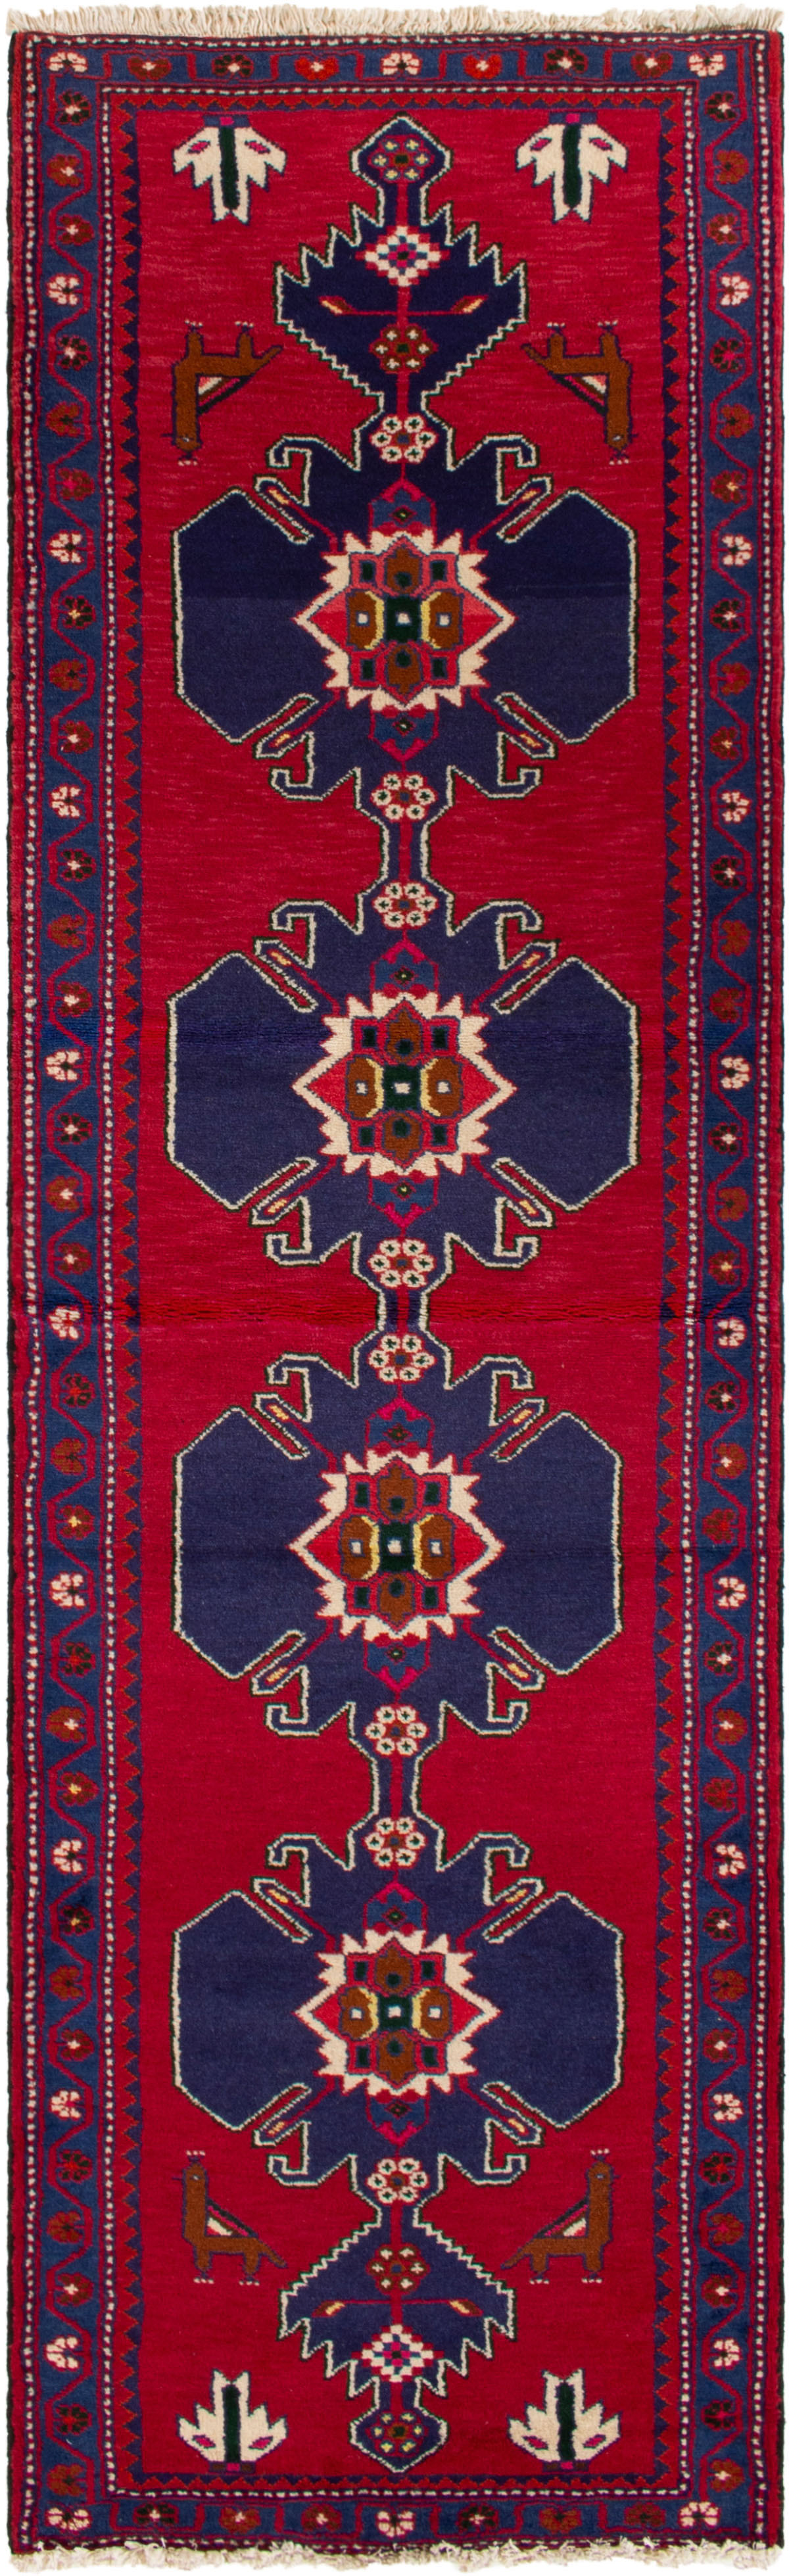 Hand-knotted Kashan  Wool Rug 2'7" x 9'1" Size: 2'7" x 9'1"  